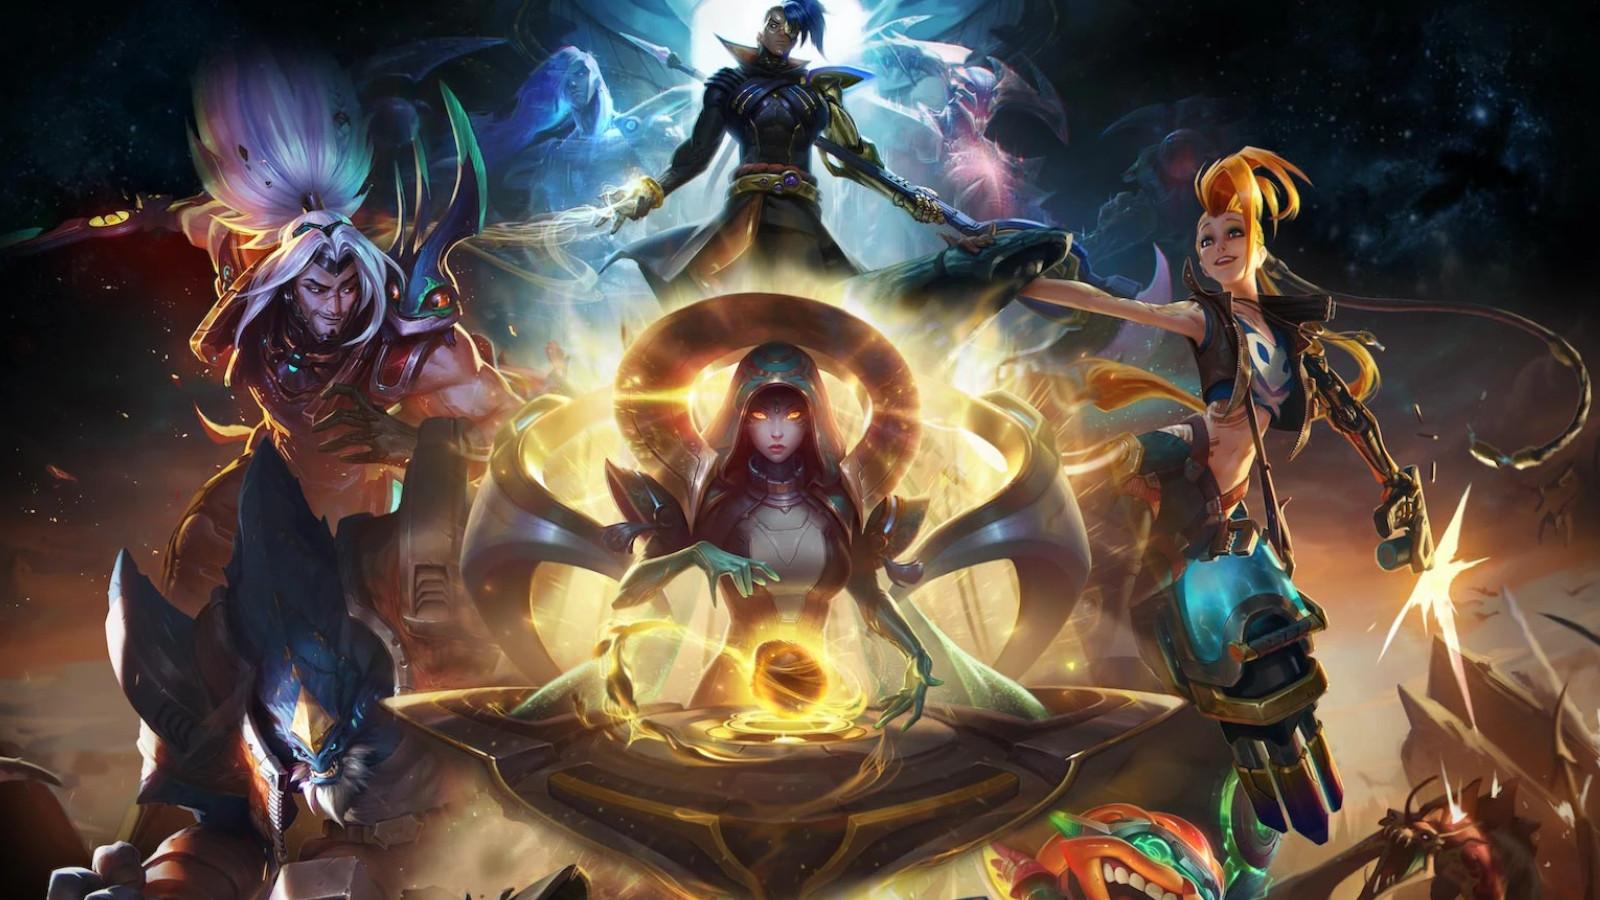 Special Game Modes in League of Legends 